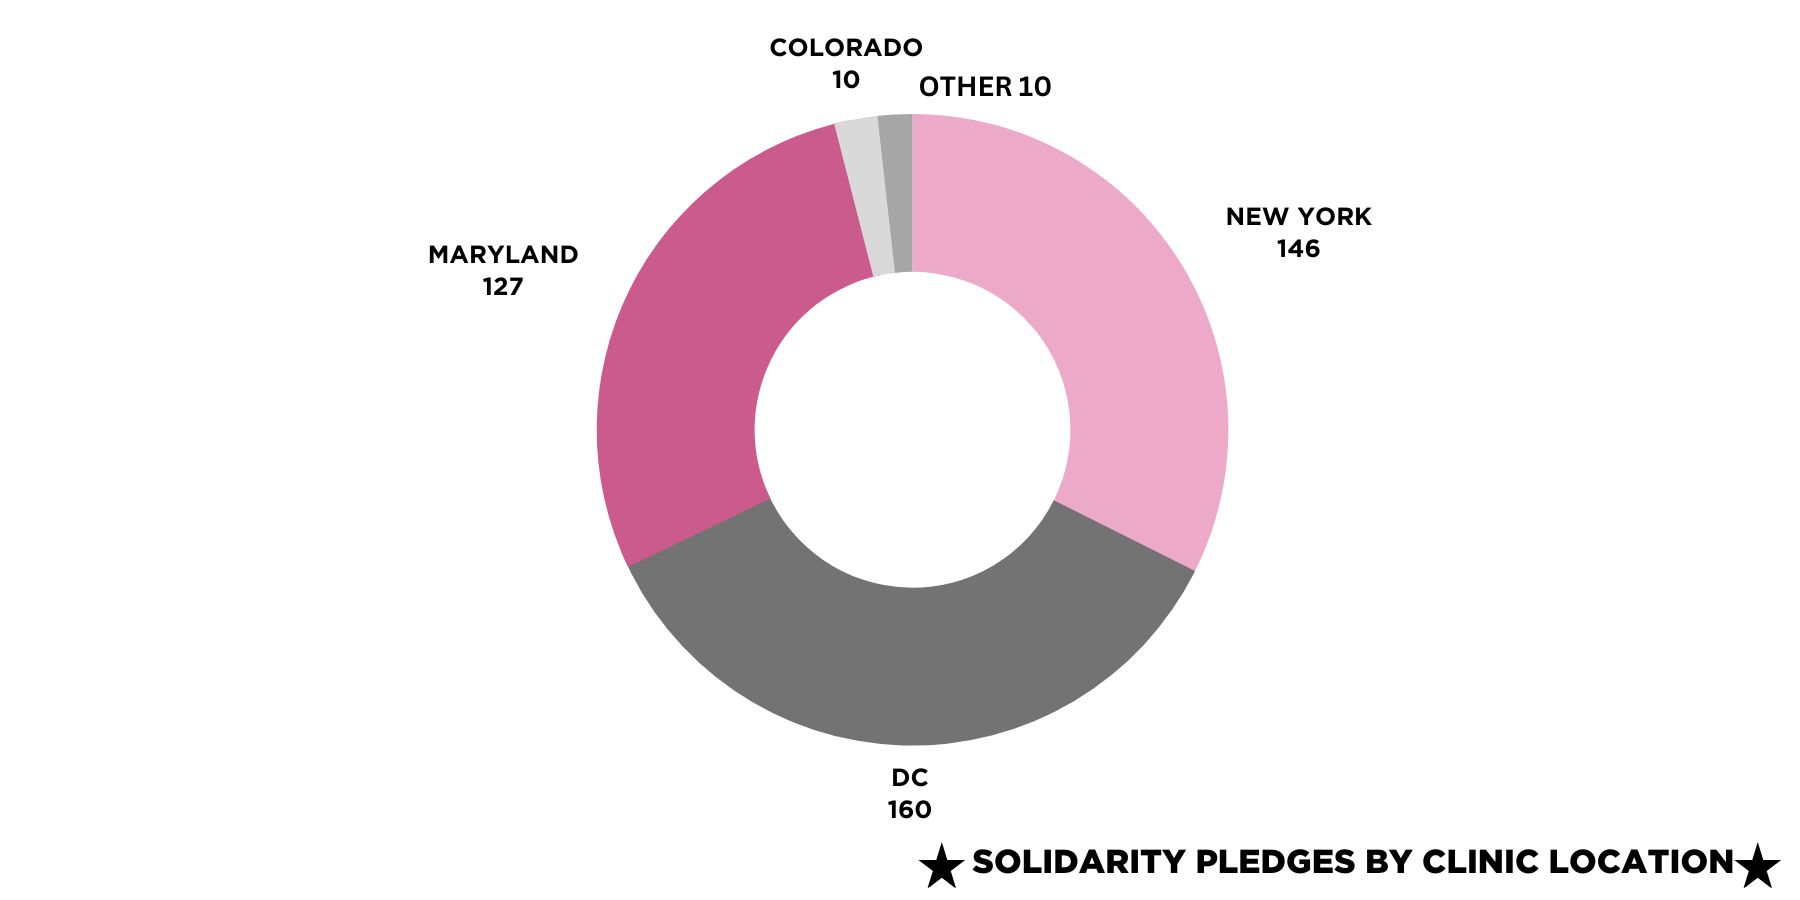 donut-shaped pie chart shows the majority of our solidarity pledges go to clinics in MD, DC, NY and a few to CO